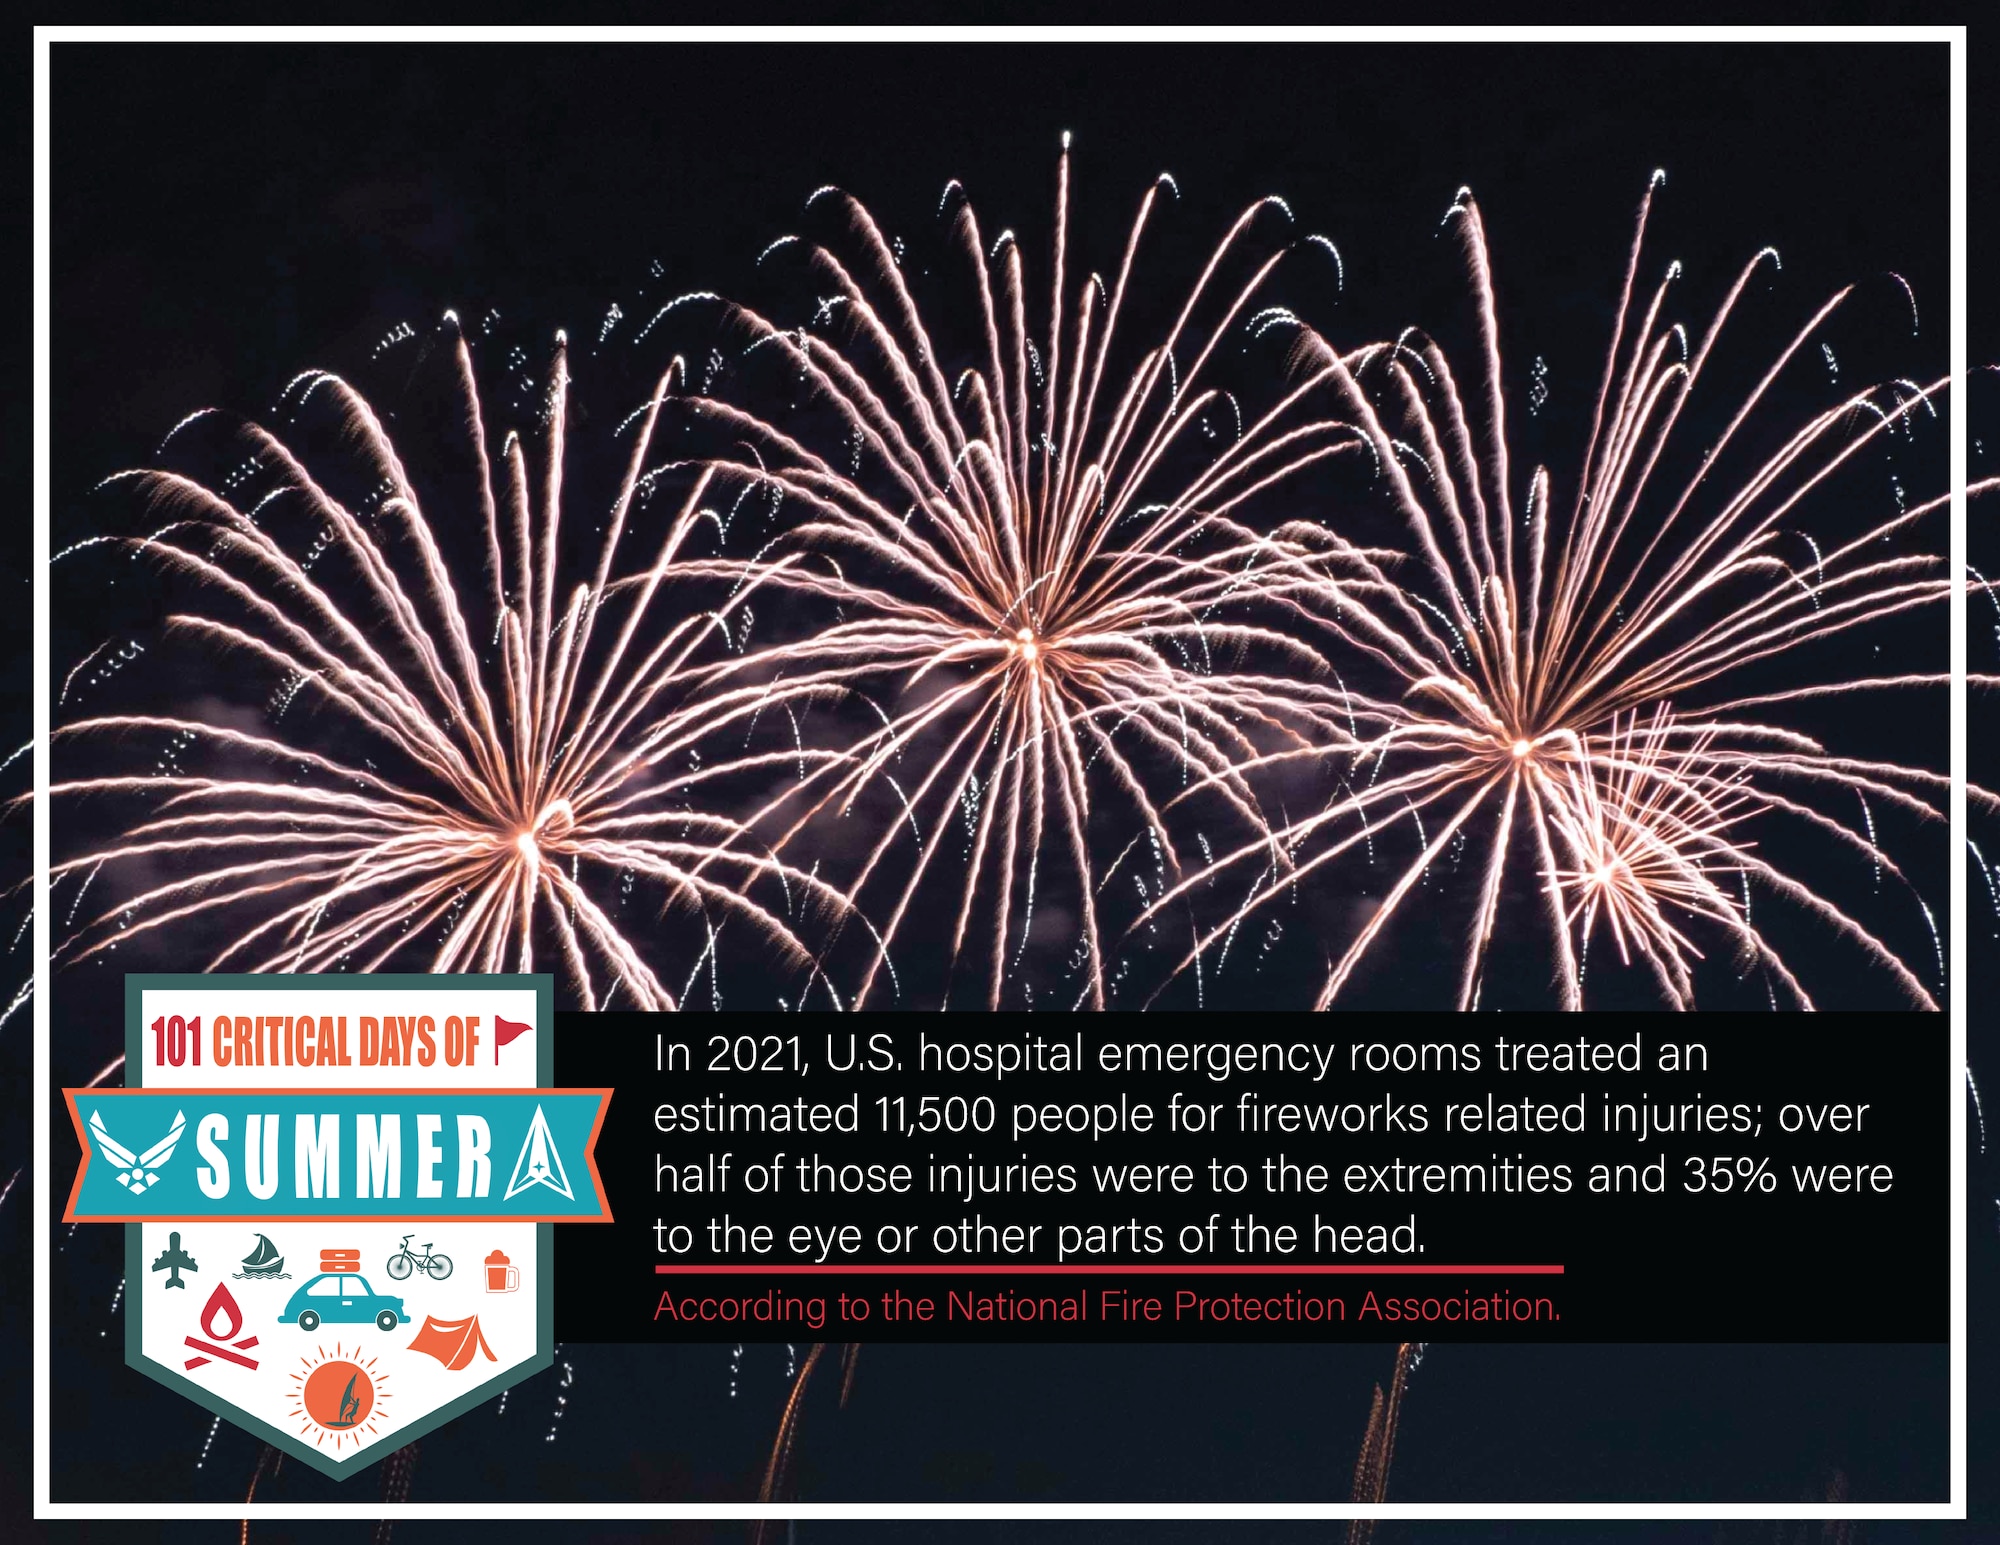 An Adobe Illustrator graphic depicting a firework statistic created June 26, 2023, for the purpose of supporting the 101 Critical Days of Summer campaign. The 101 Critical Days of Summer campaign was created to raise awareness about the increased risks and dangers that occur during the summer season. (U.S. Air Force graphic by Airman 1st Class Keira Rossman)